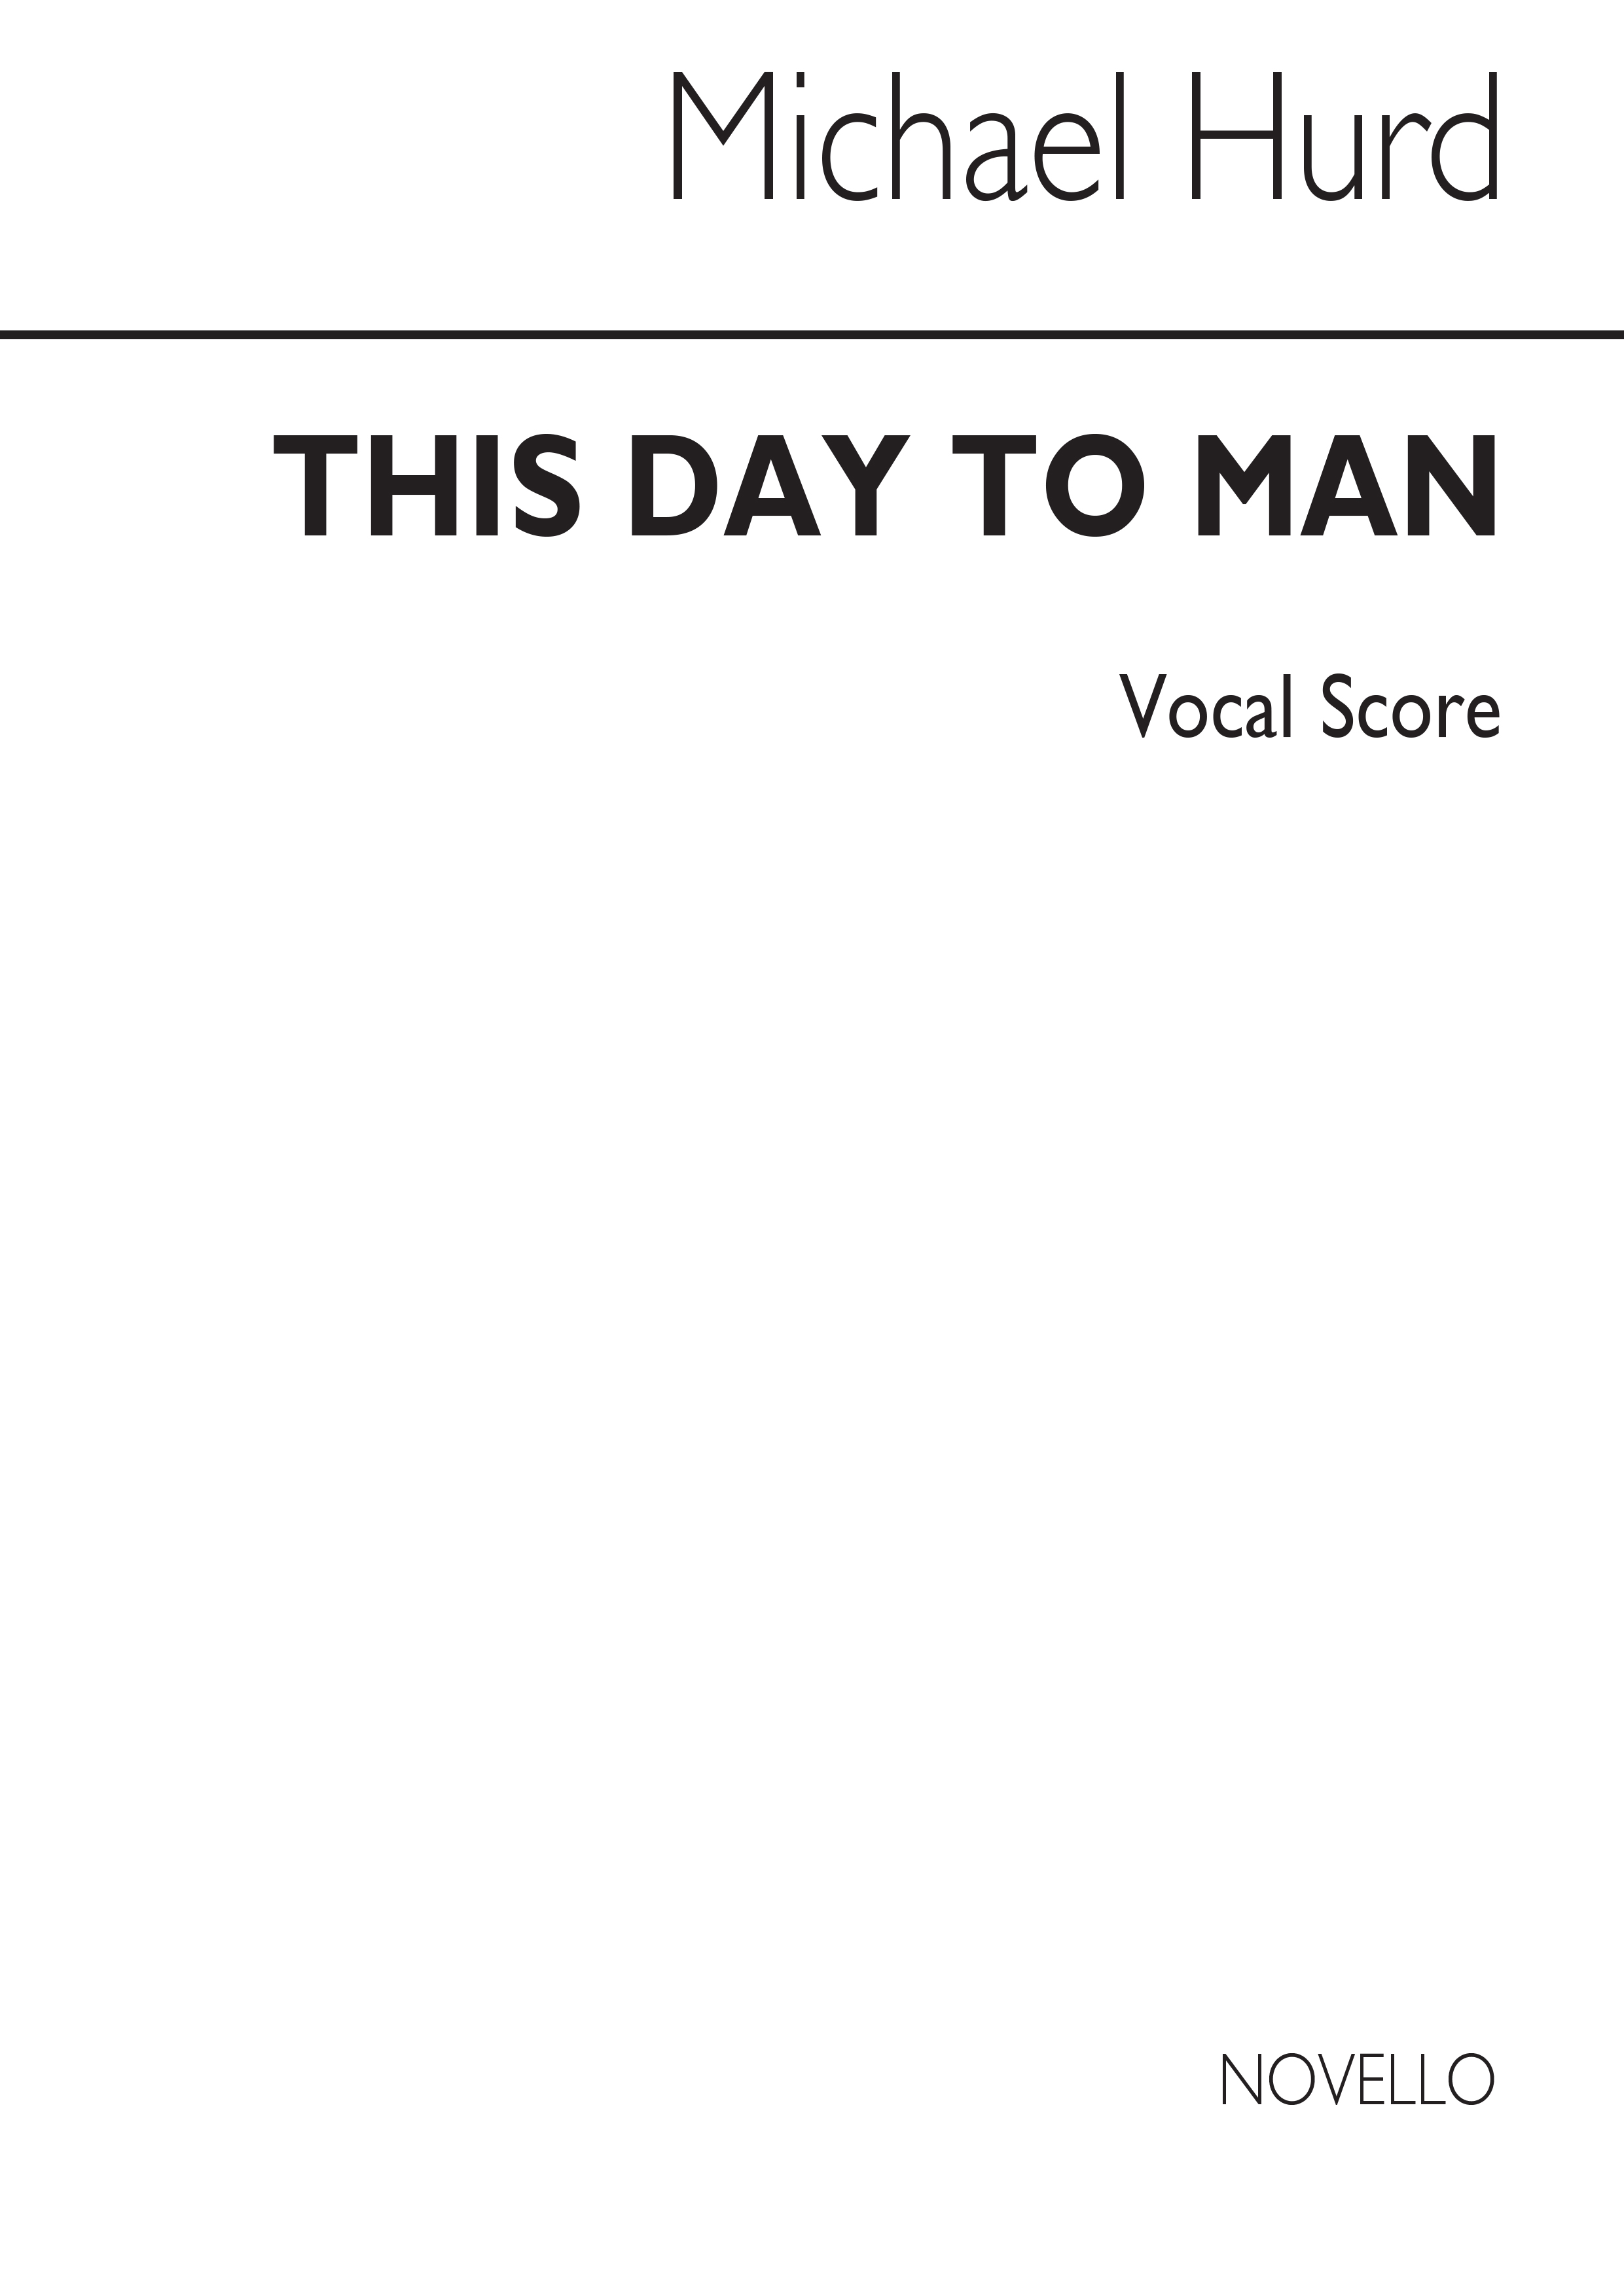 Hurd: This Day To Man (Vocal Score)